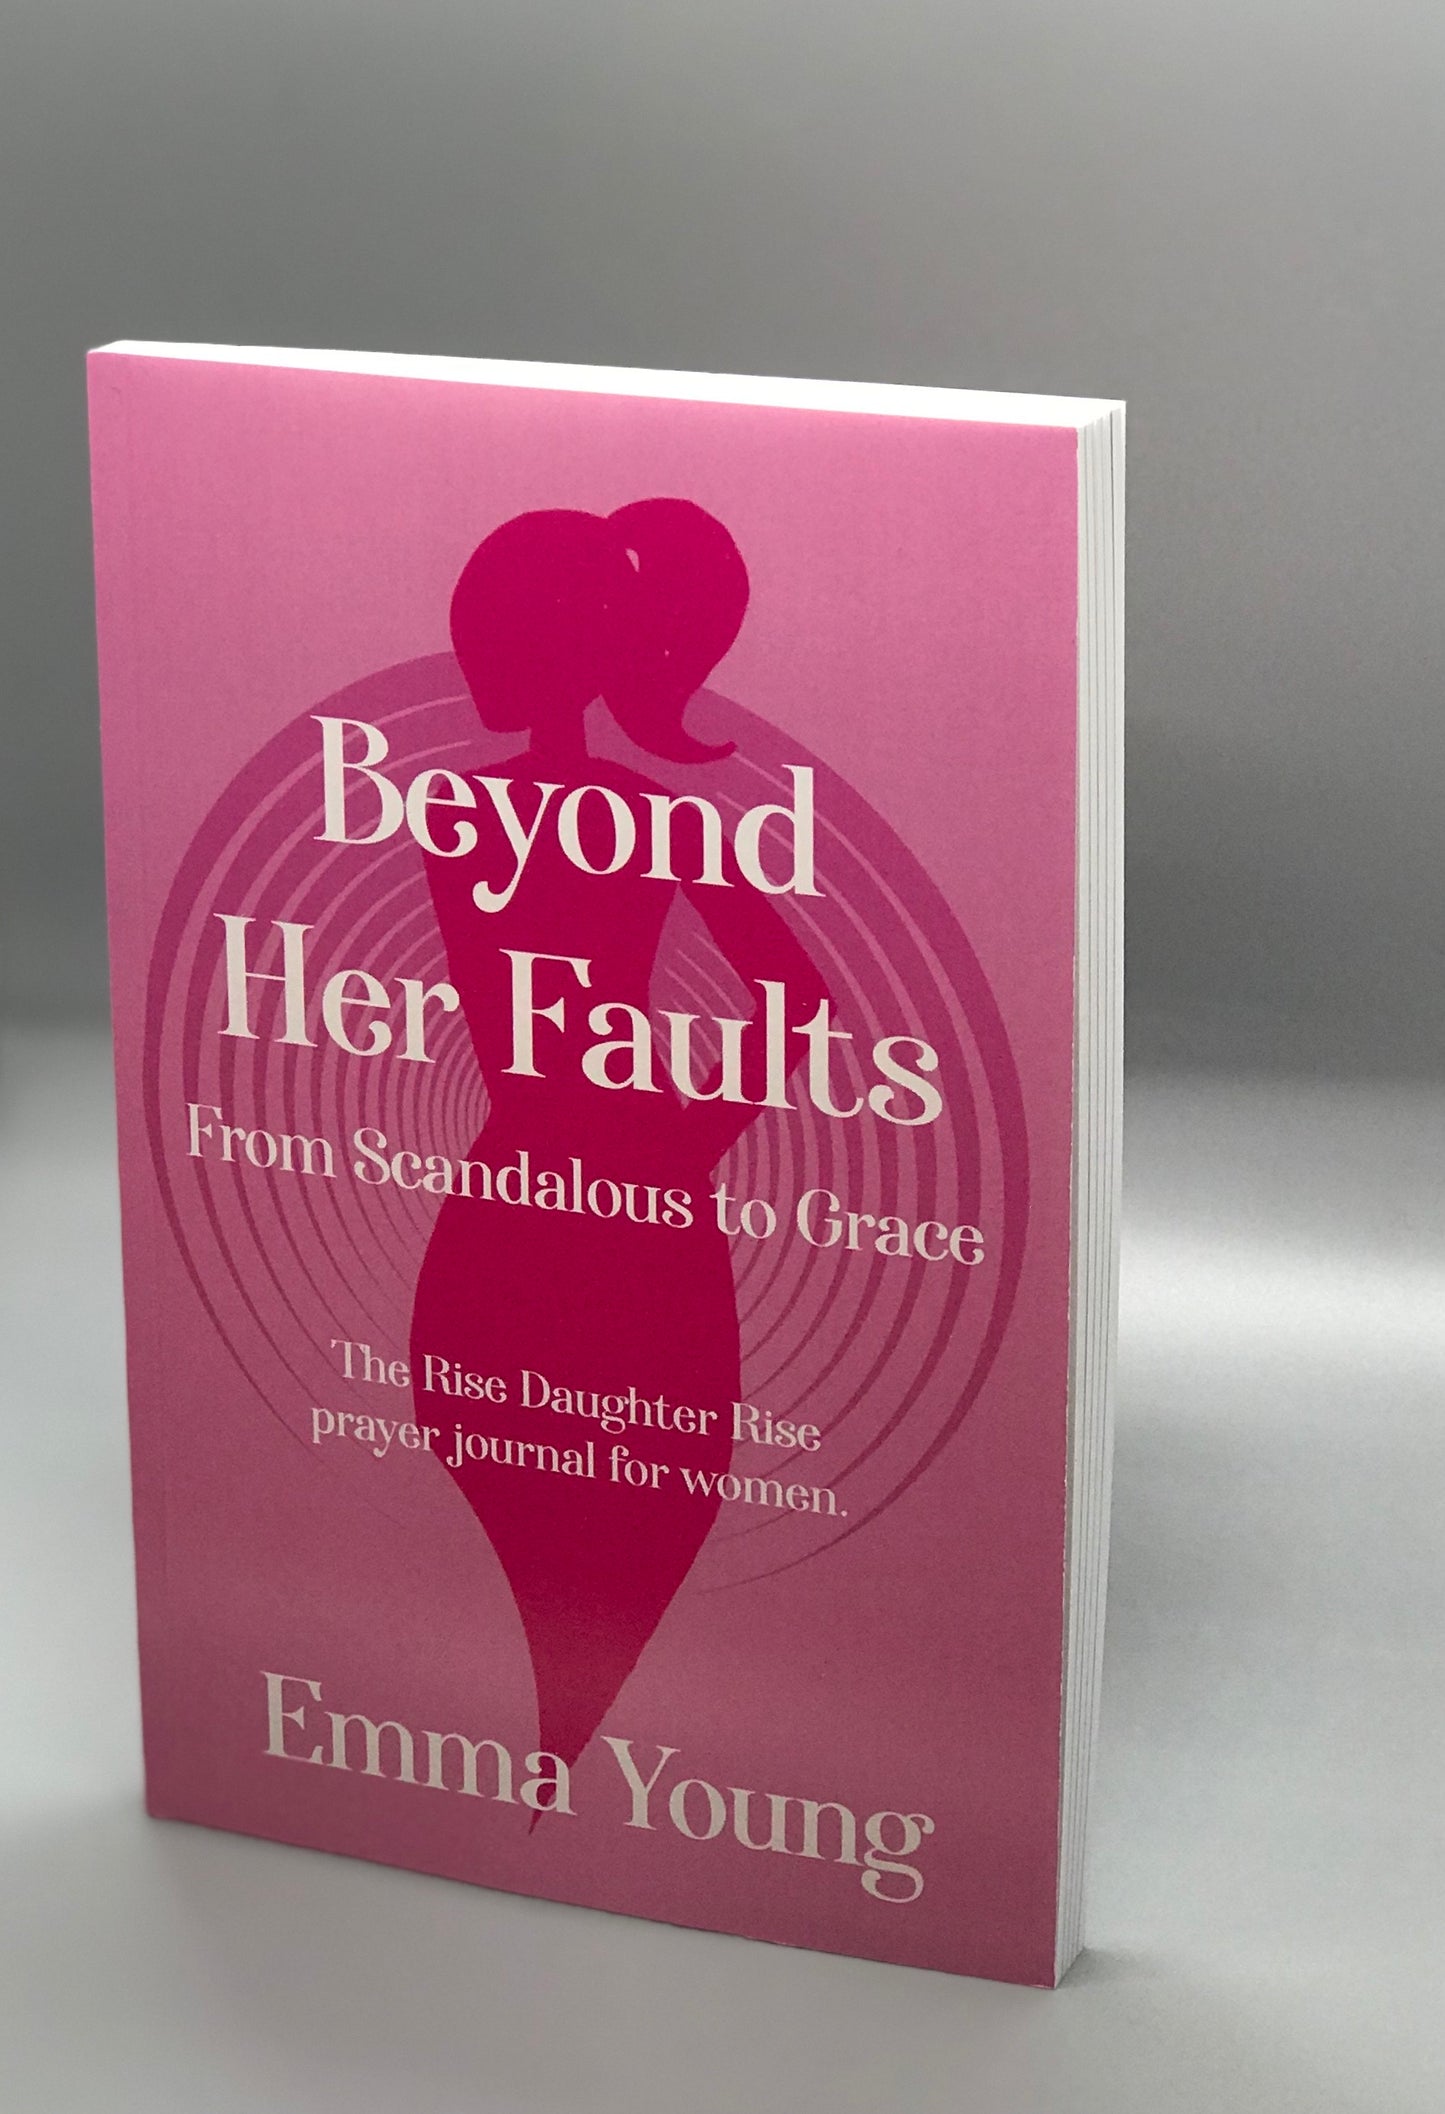 Beyond Her Faults (From Scandalous to Grace)